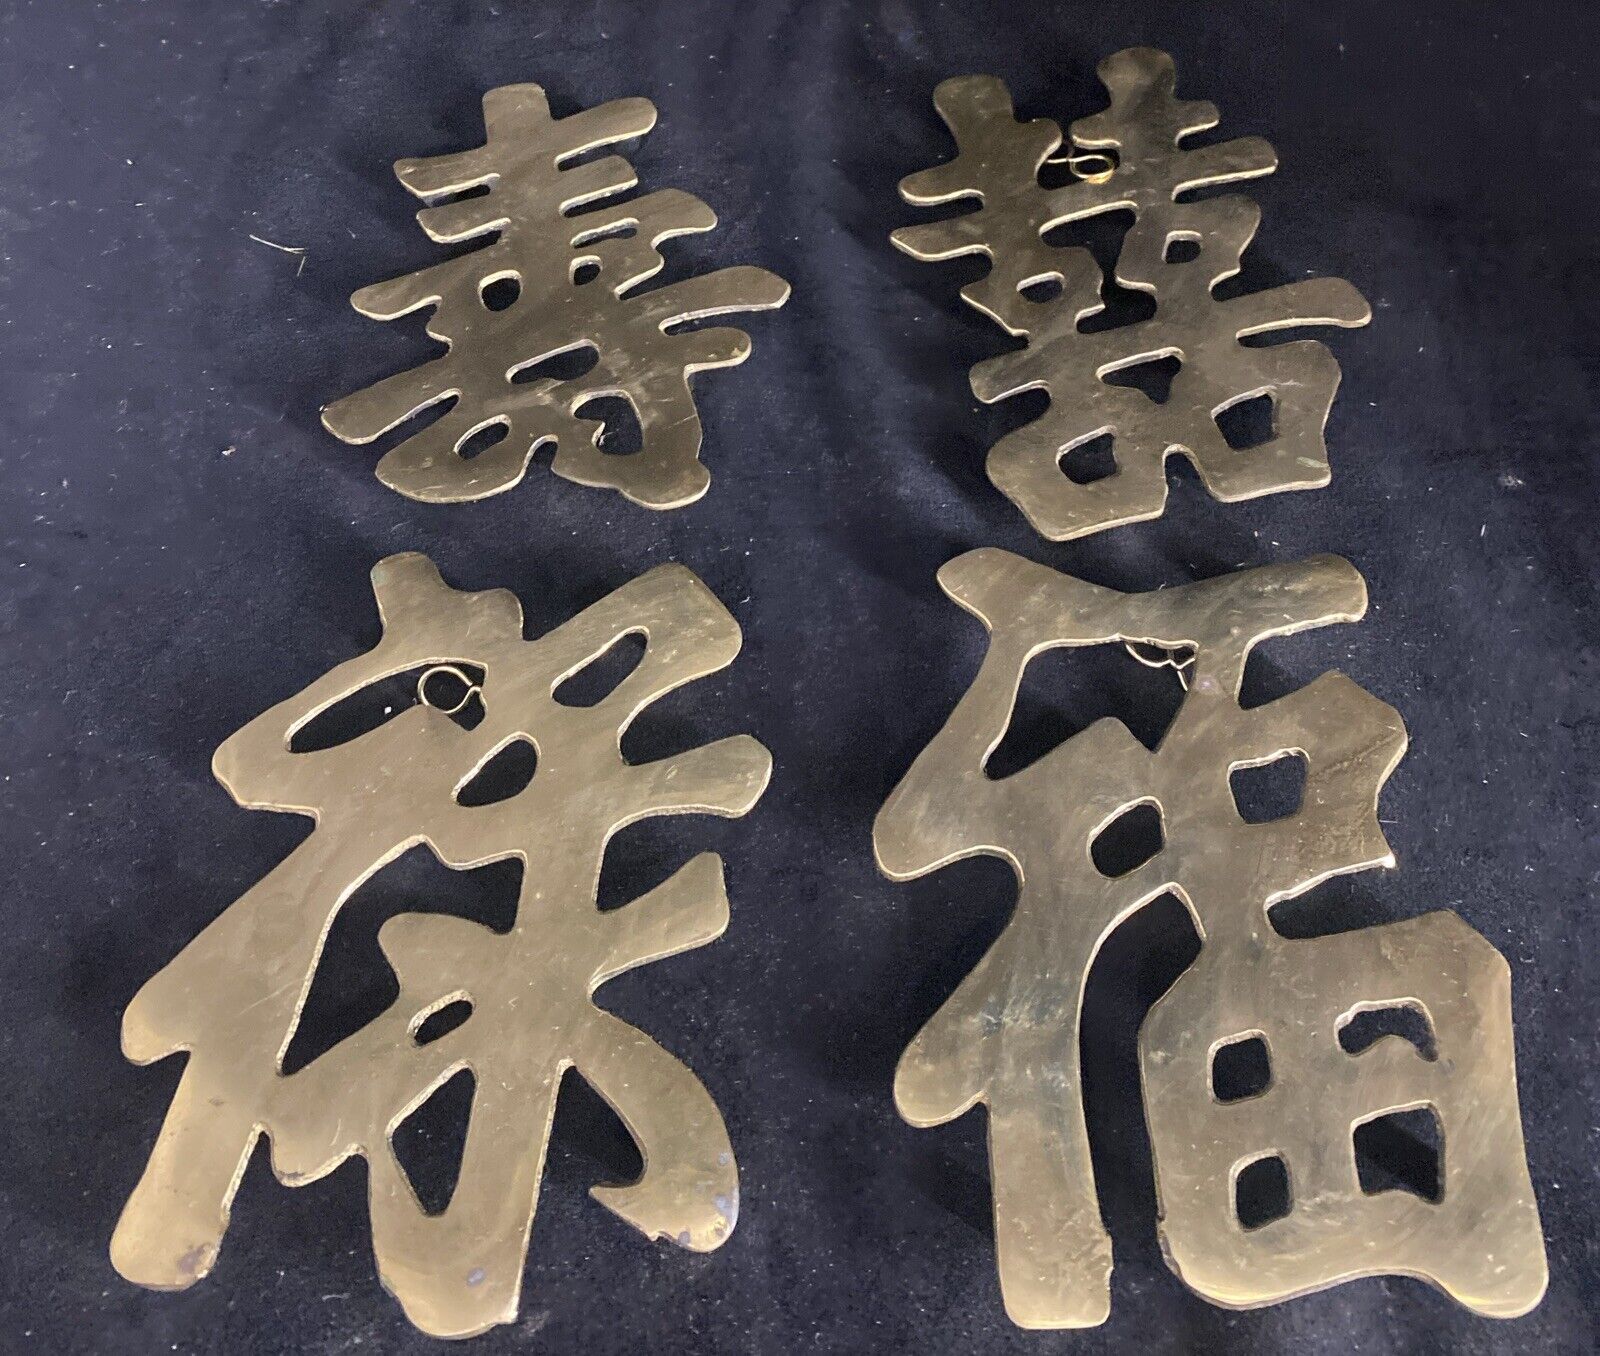 Chinese Symbols Set of 4 Wall Trivets. Vintage Brass